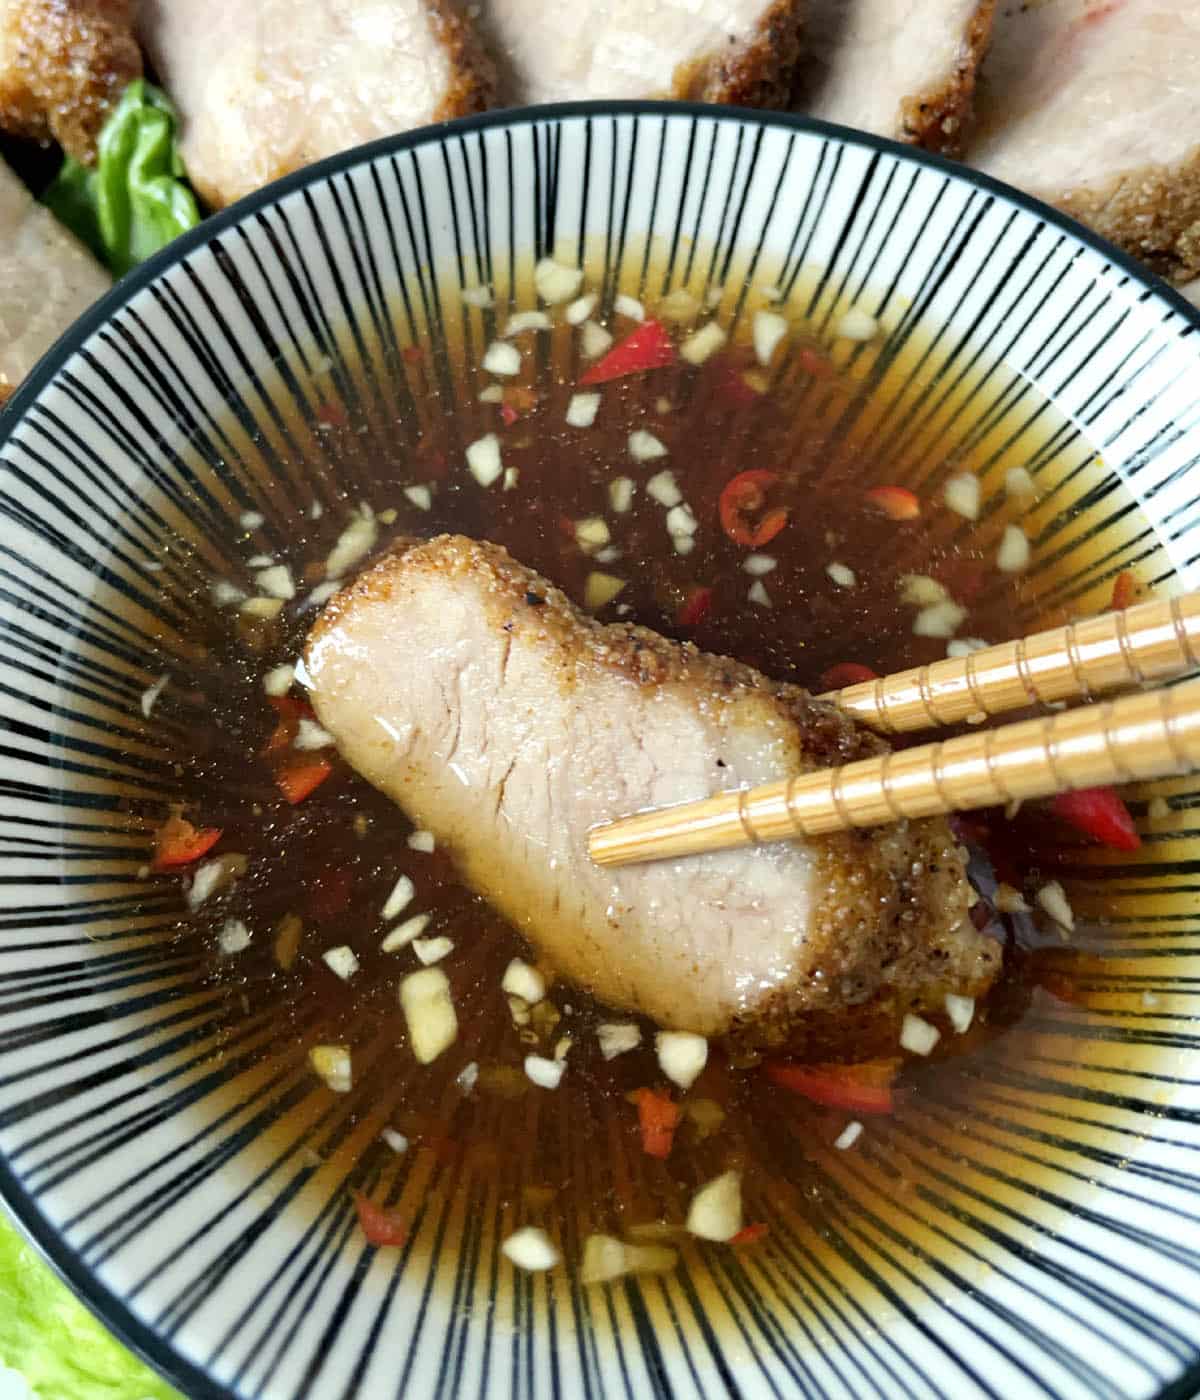 Wooden chopsticks dipping a spice of meat in a round bowl of dipping sauce.